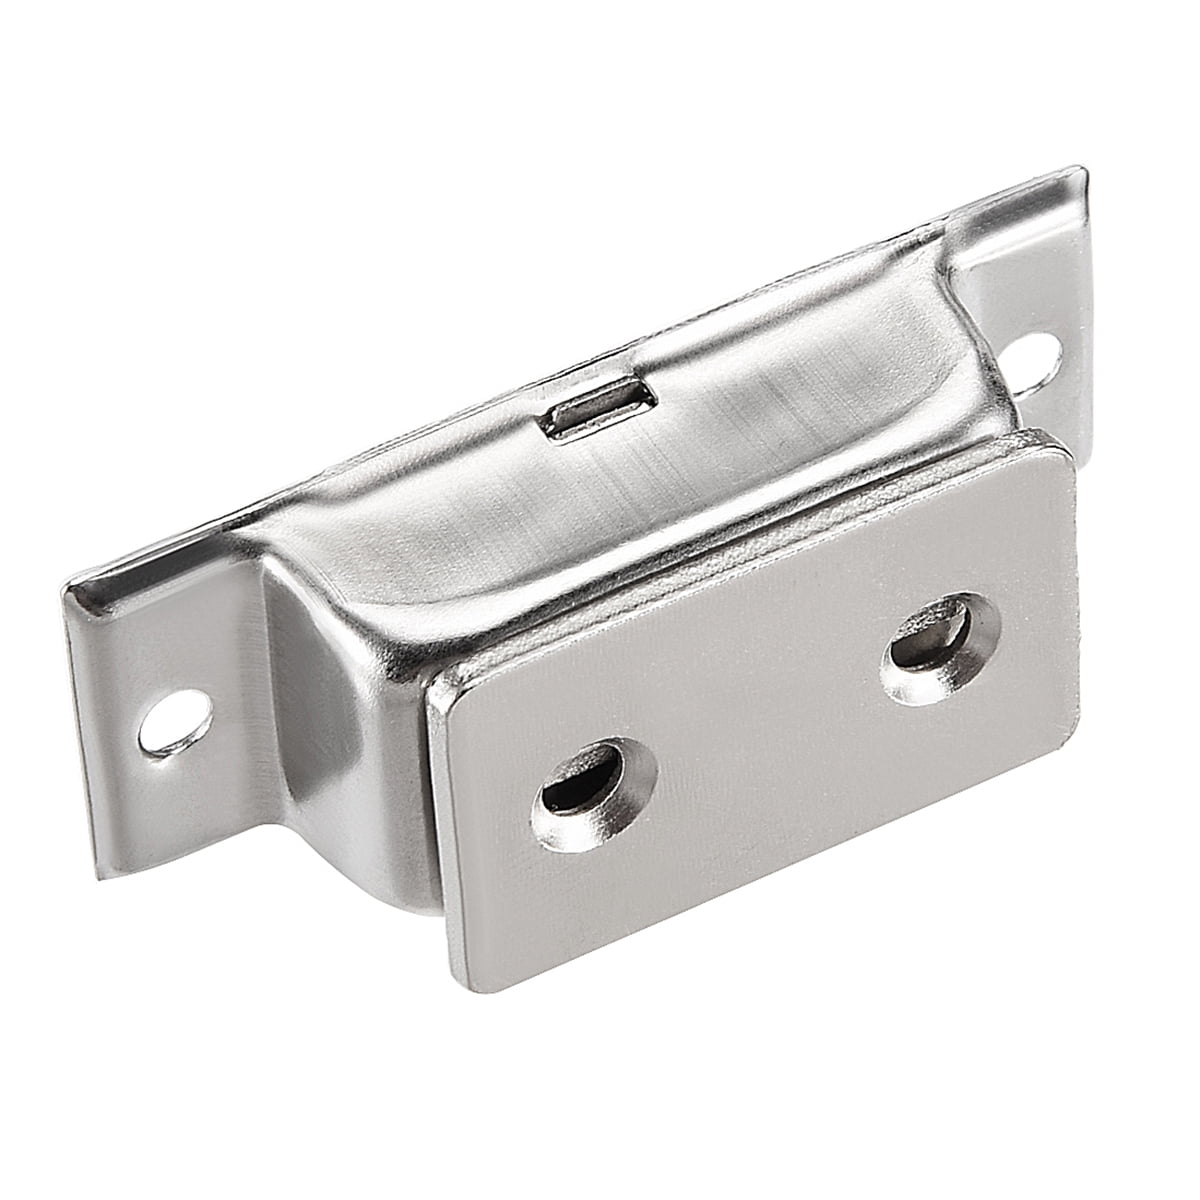 Door Wardrobe Magnetic Catch Magnet Latch Closure Stainless Steel 51mm ...